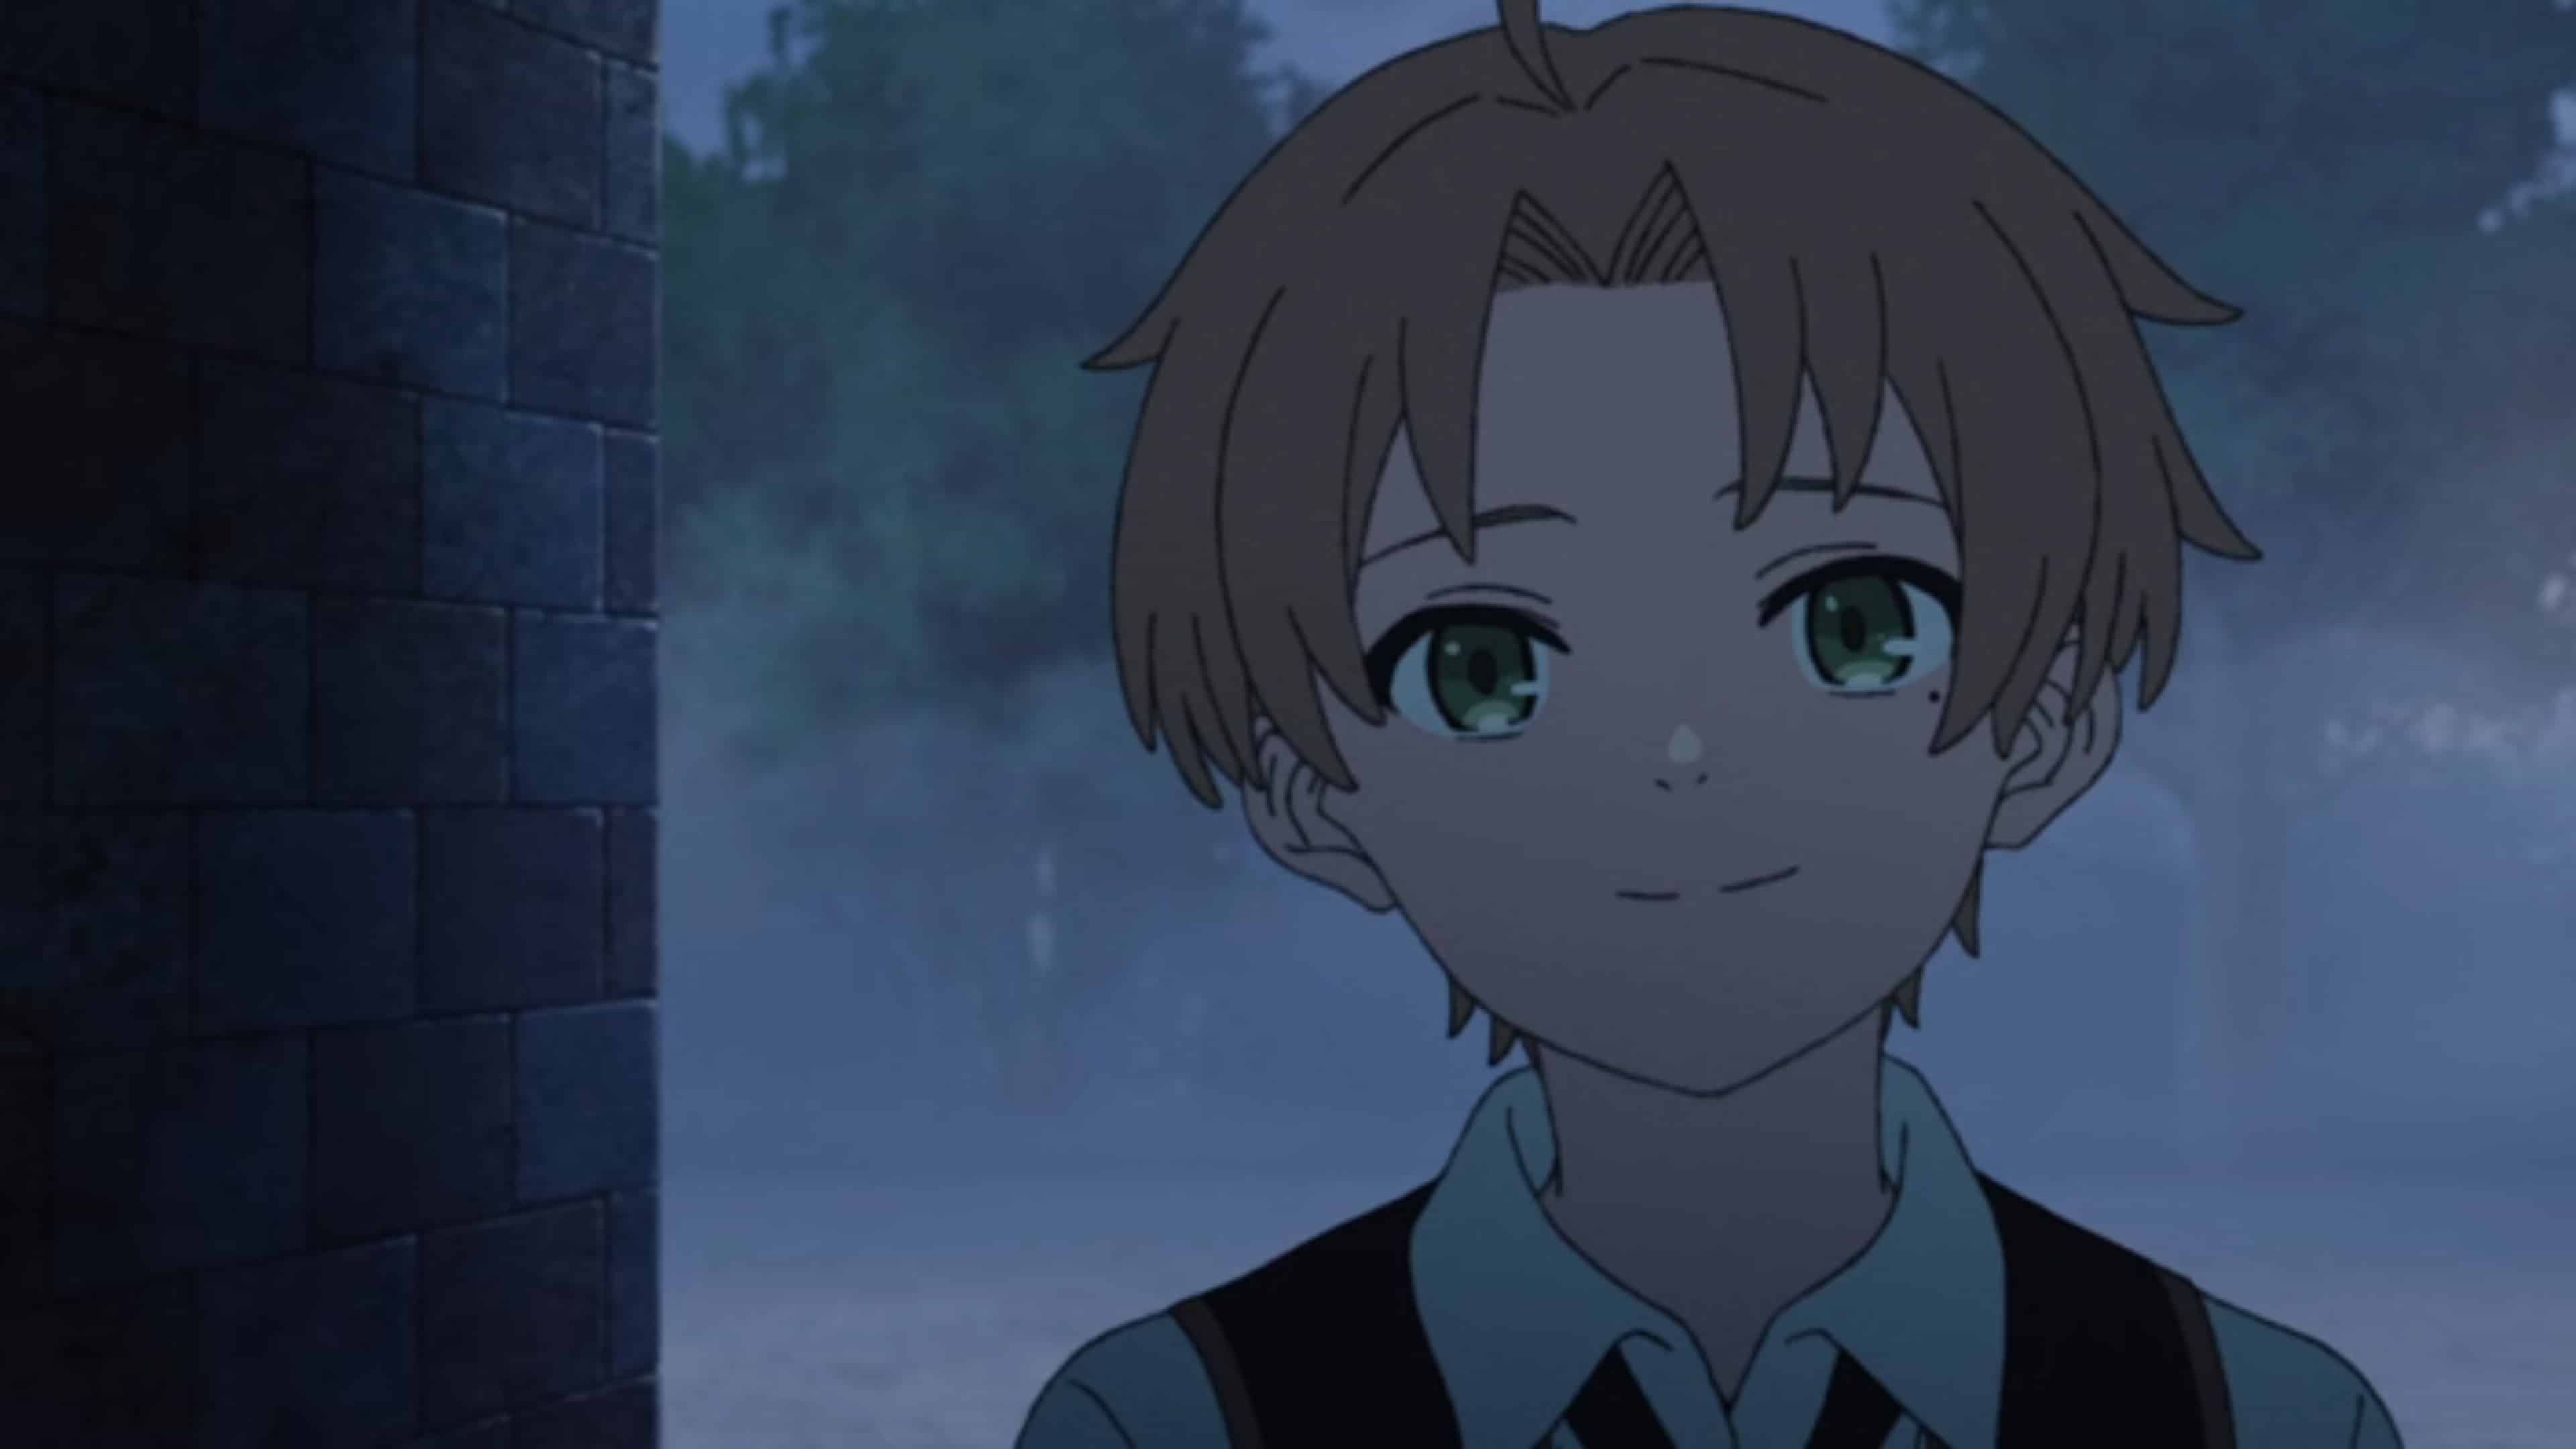 Mushoku Tensei: Jobless Reincarnation: Season 1/ Episode 5 “A Young Lady and Violence” – Recap/ Review (with Spoilers)